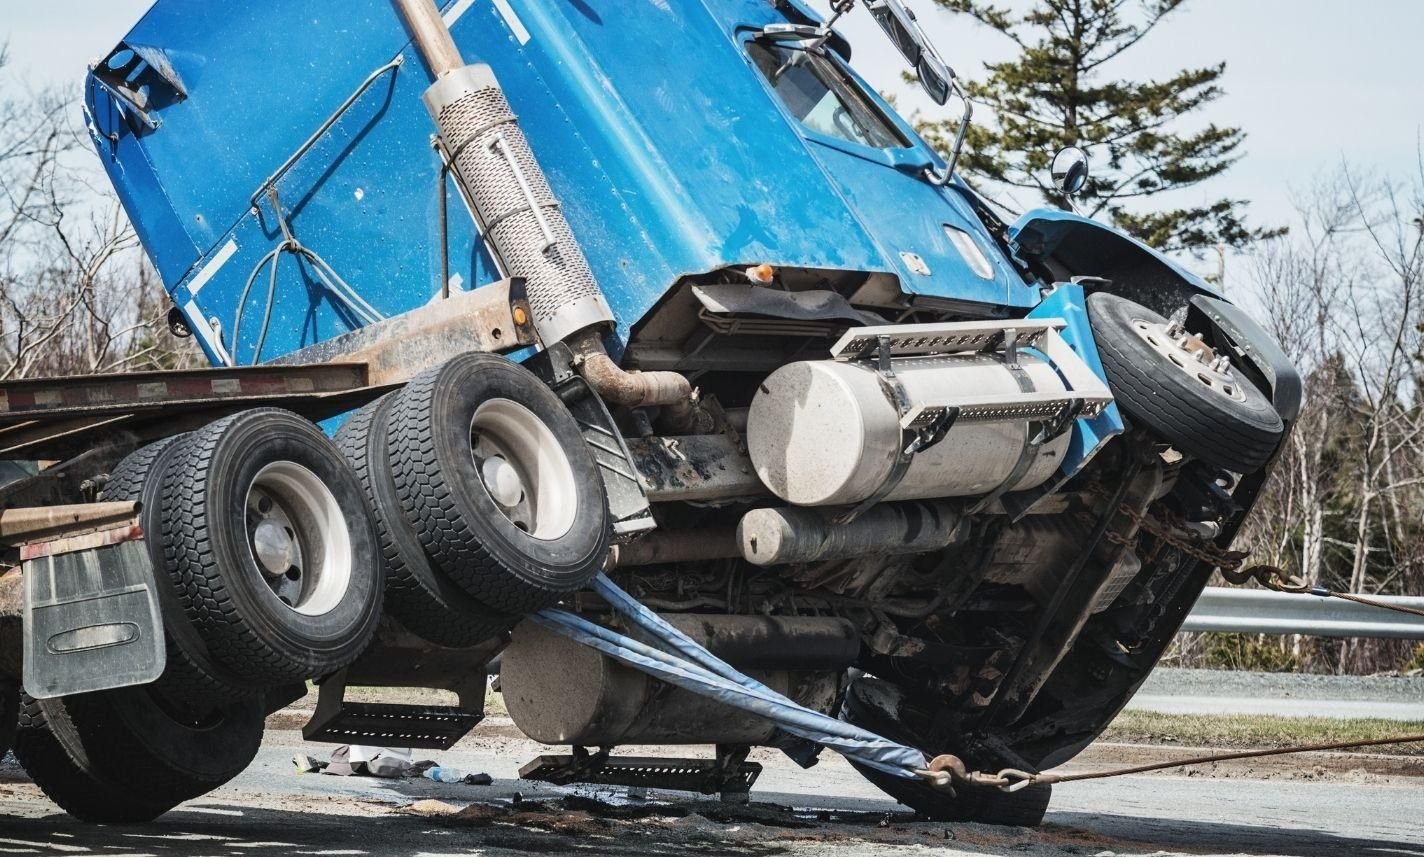 mableton-commercial-truck-accident-injury-lawyer